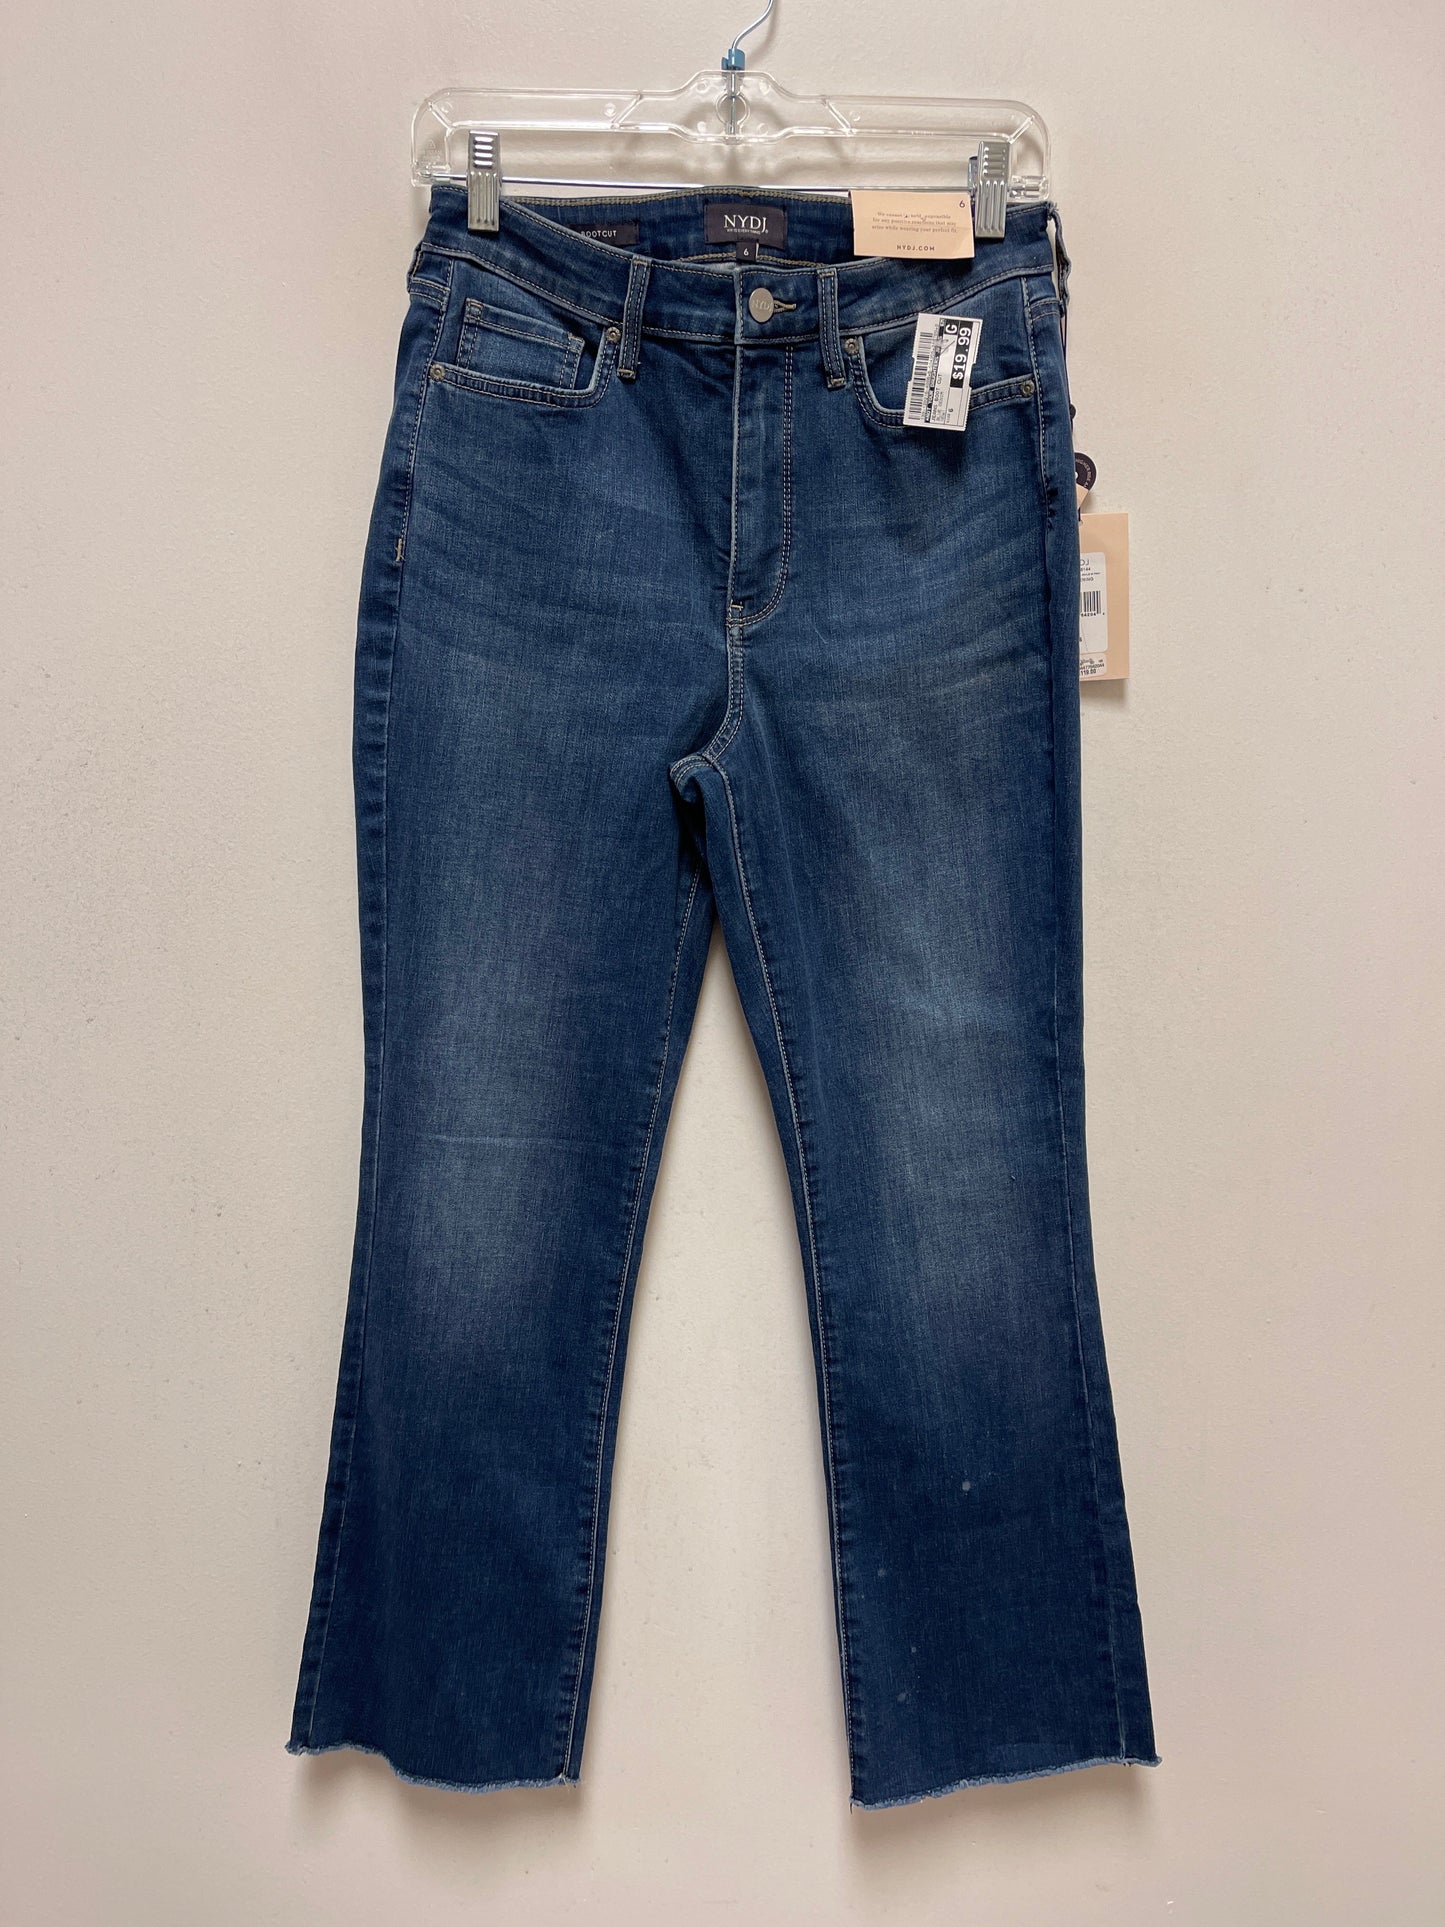 Blue Denim Jeans Boot Cut Not Your Daughters Jeans, Size 6